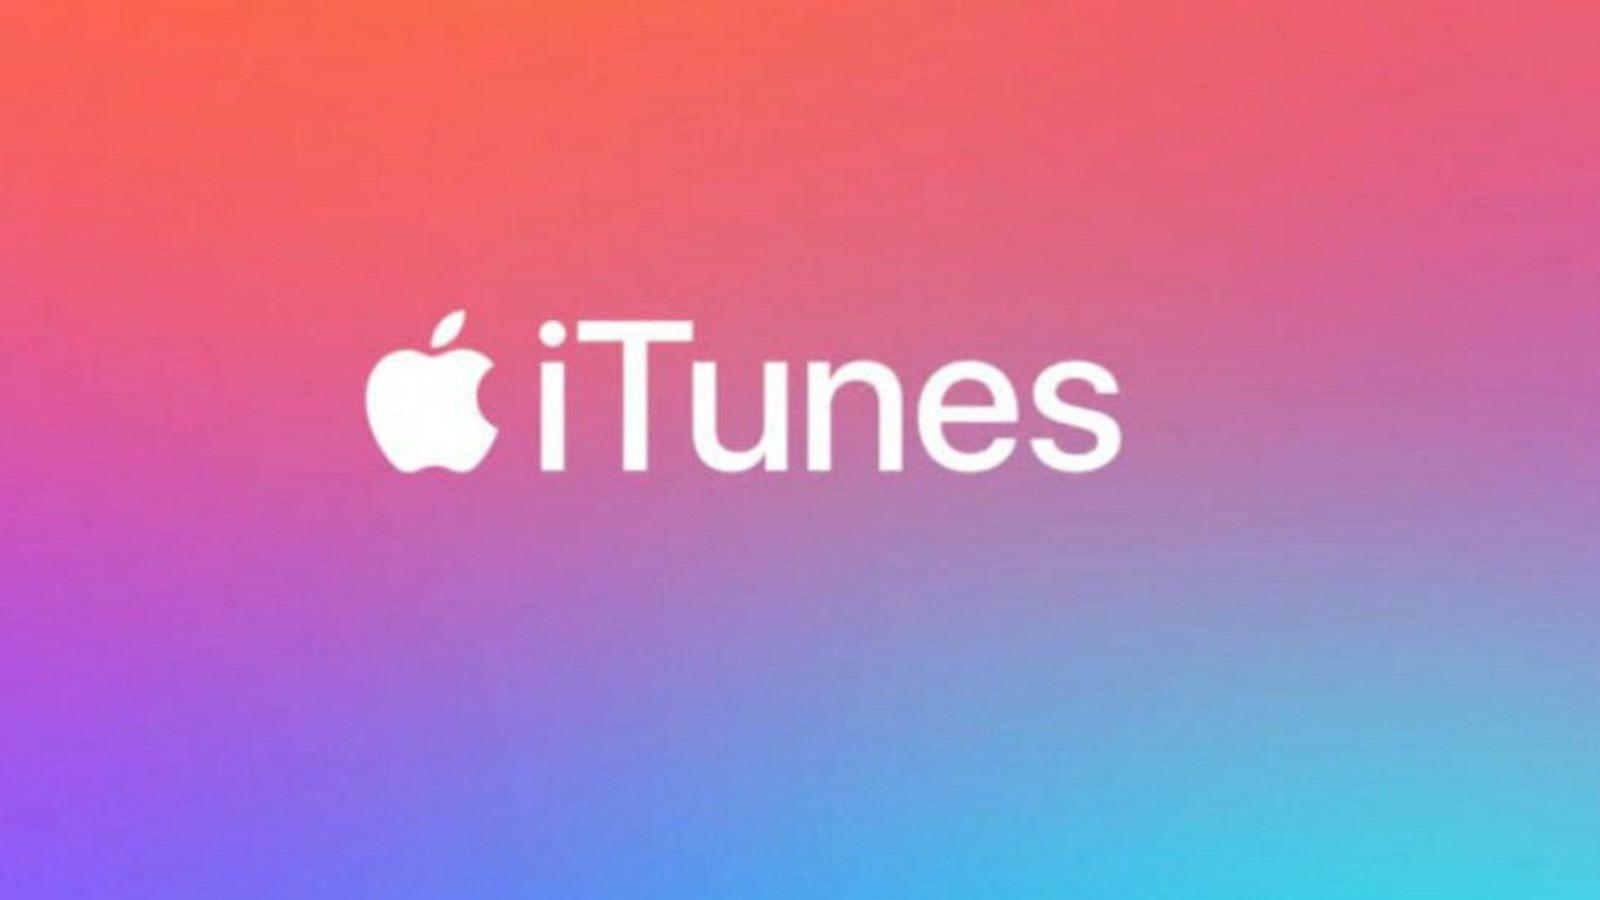 RIP iTunes. Apple says your music is safe